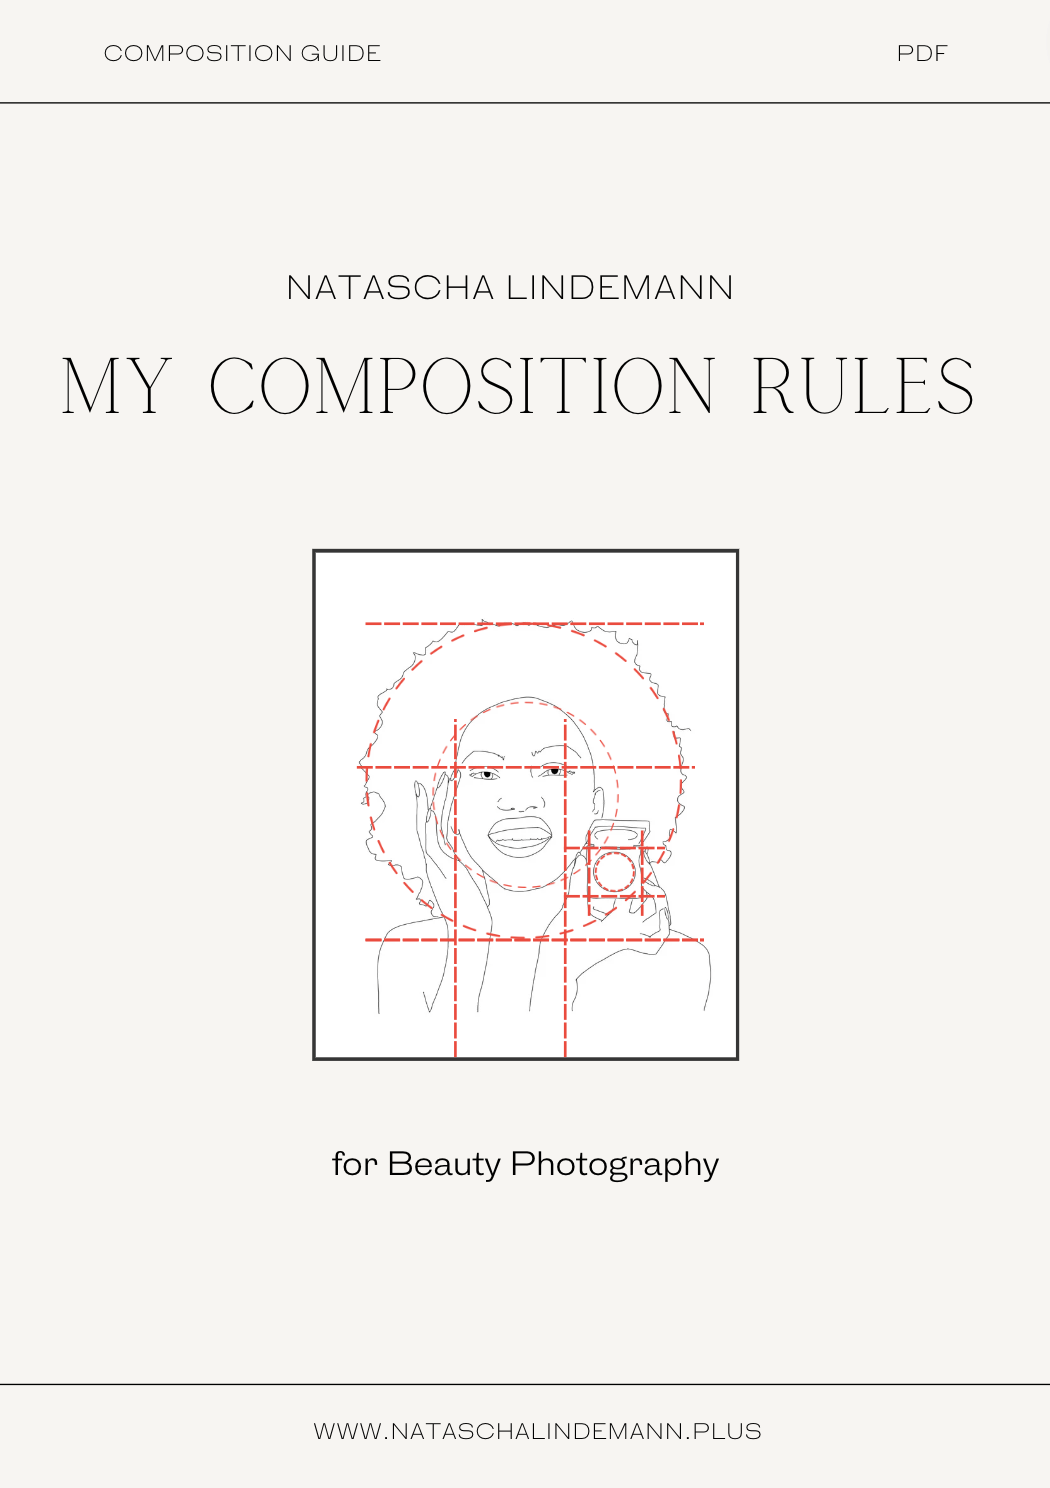 Natascha Lindemann - My Composition Rules for Beauty Photographer - PDF Guide